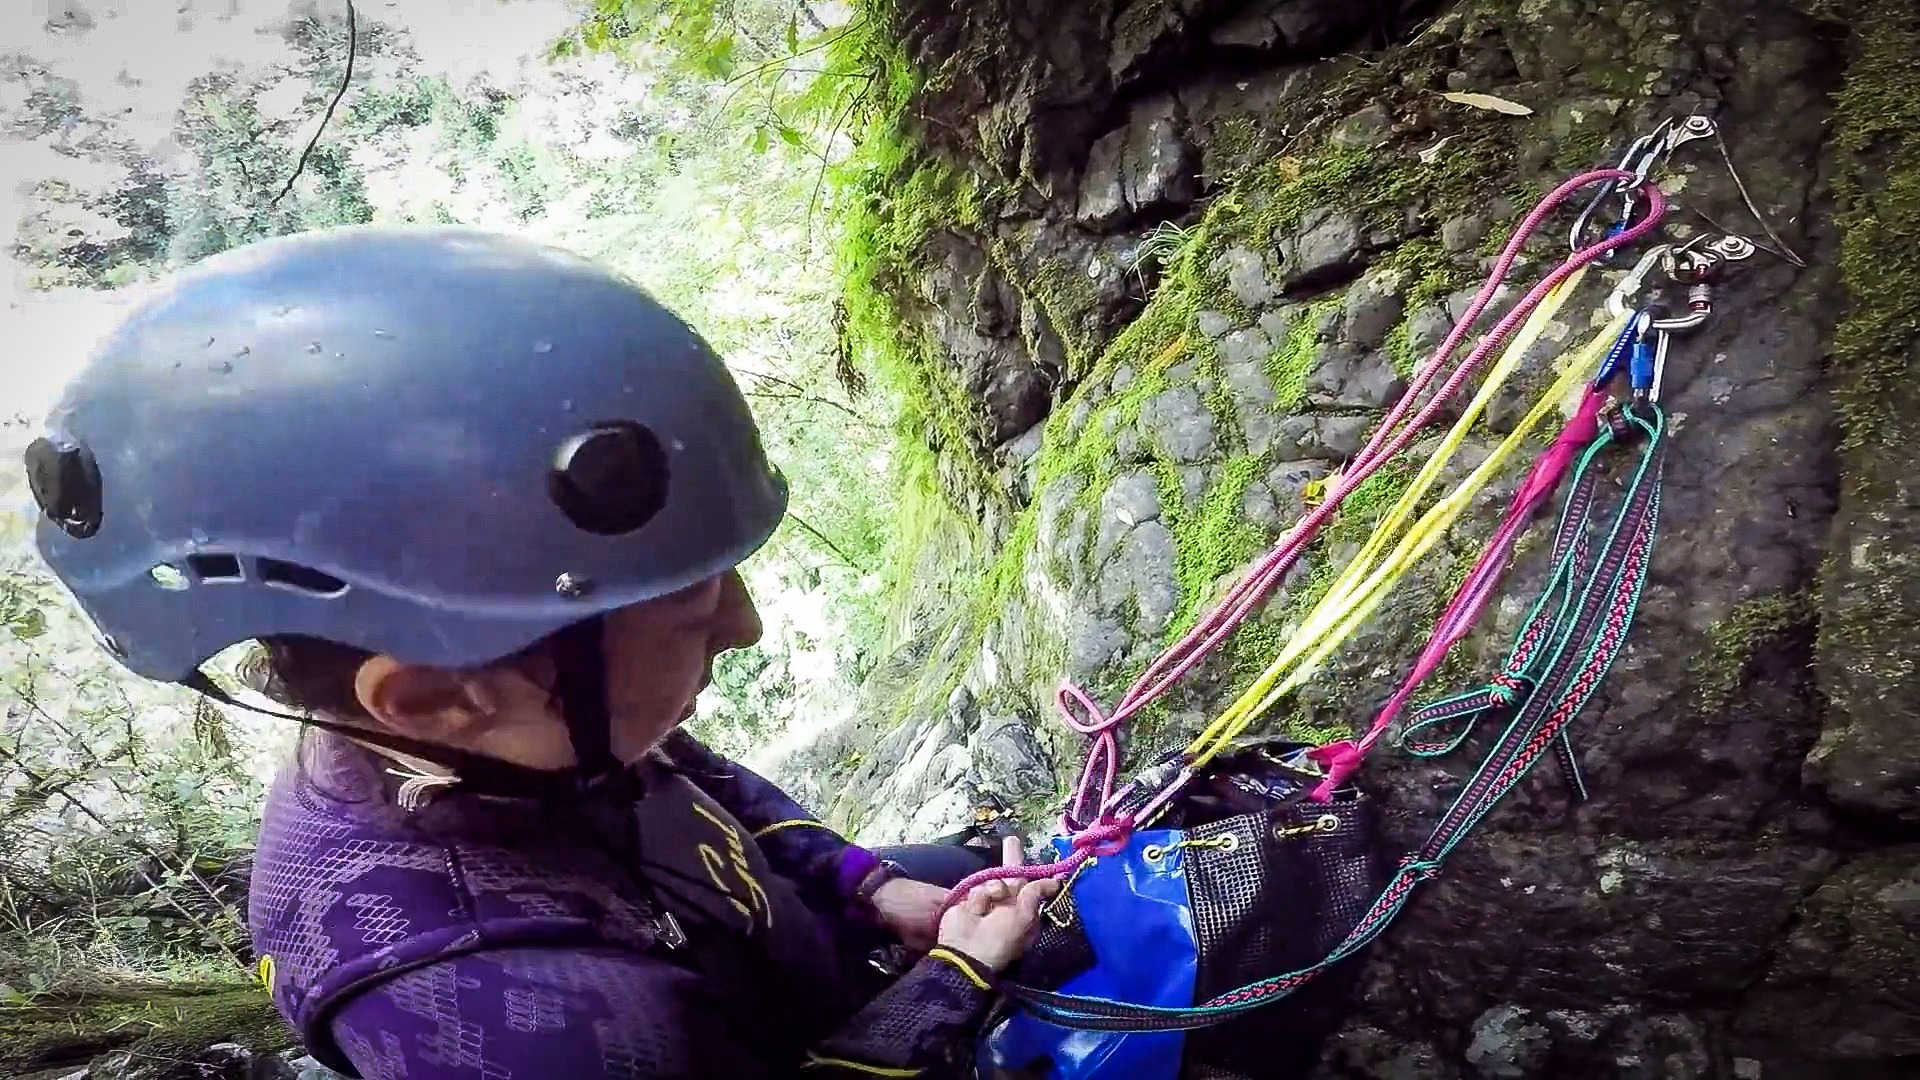 Megan setting up the anchors for another rappel down an Eager Beaver Canyon waterfall